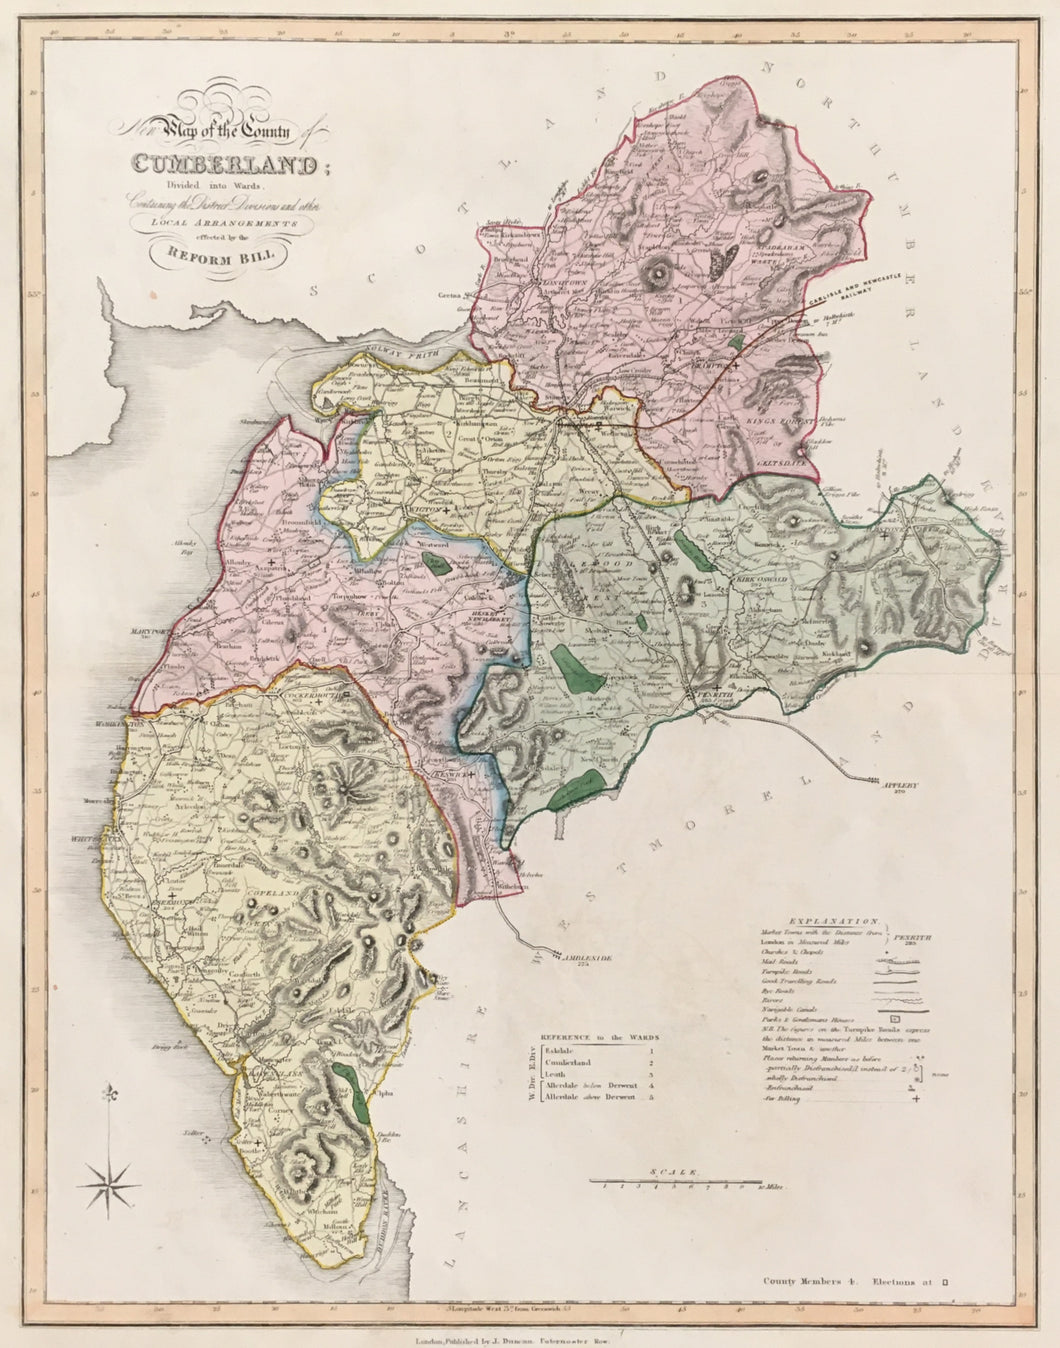 Ebden, William “New Map of the County of Cumberland”